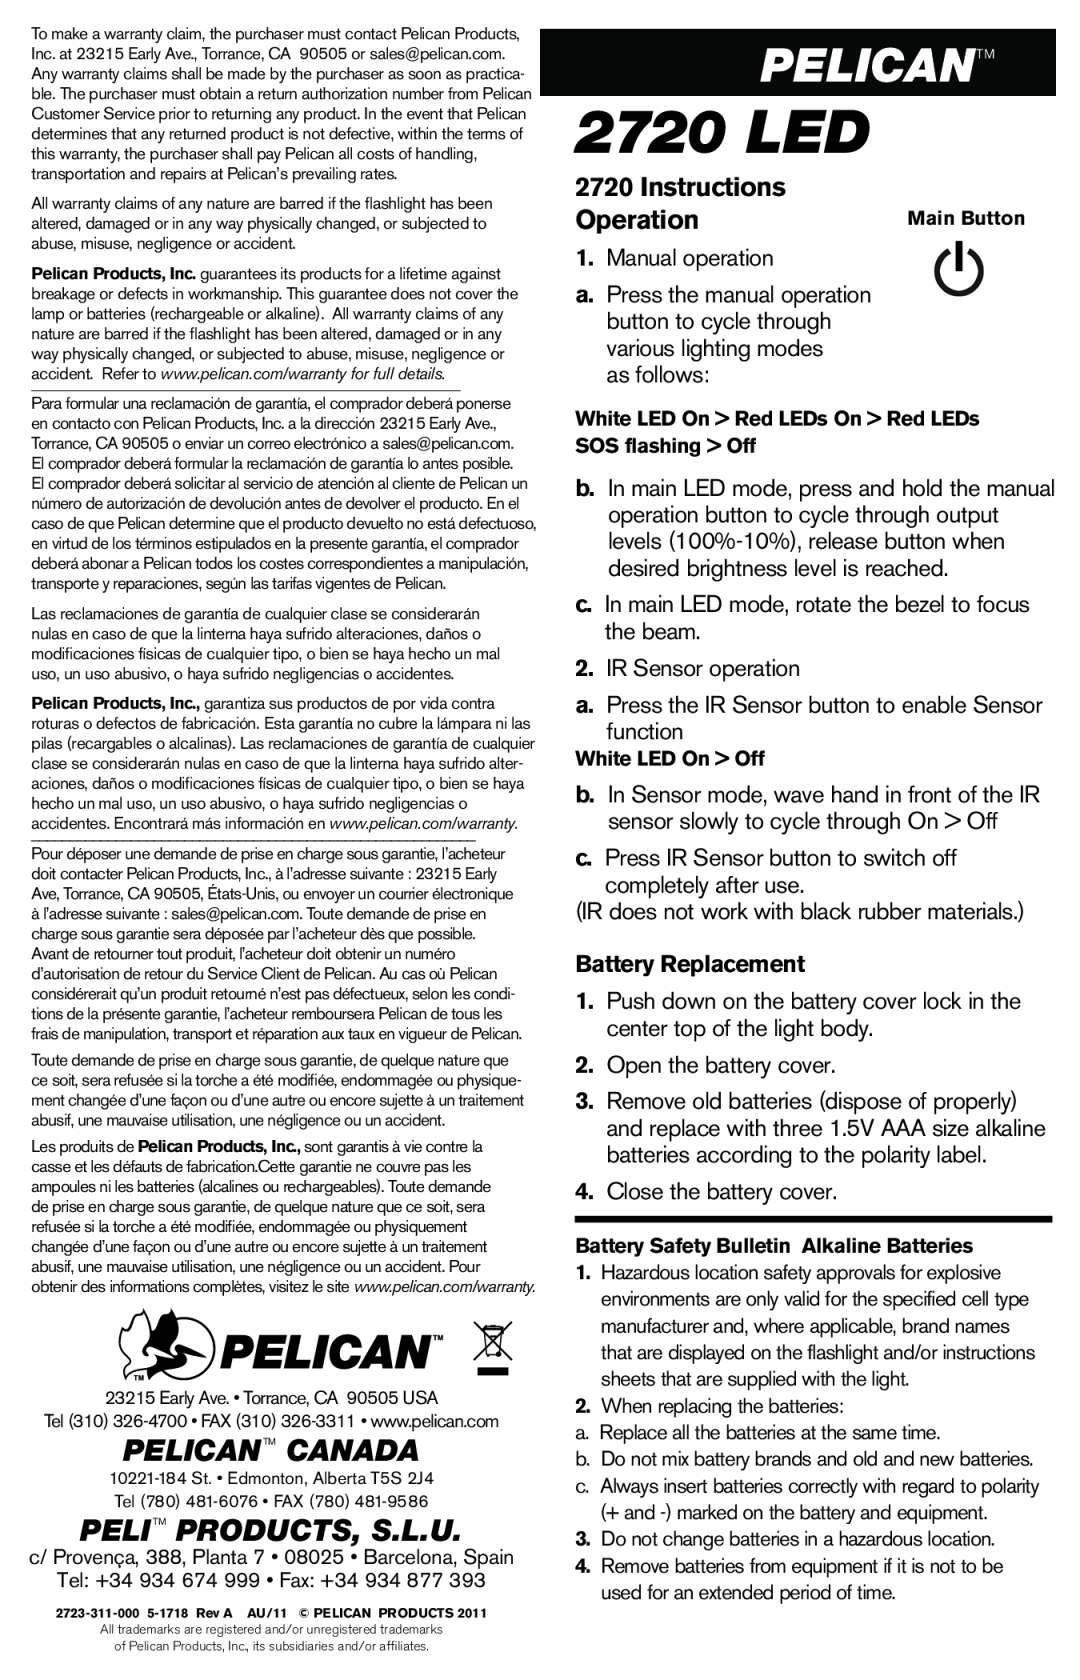 Pelican warranty Instructions, Operation, Battery Replacement, 2720 LED, Pelicantm Canada, Pelitm Products, S.L.U 